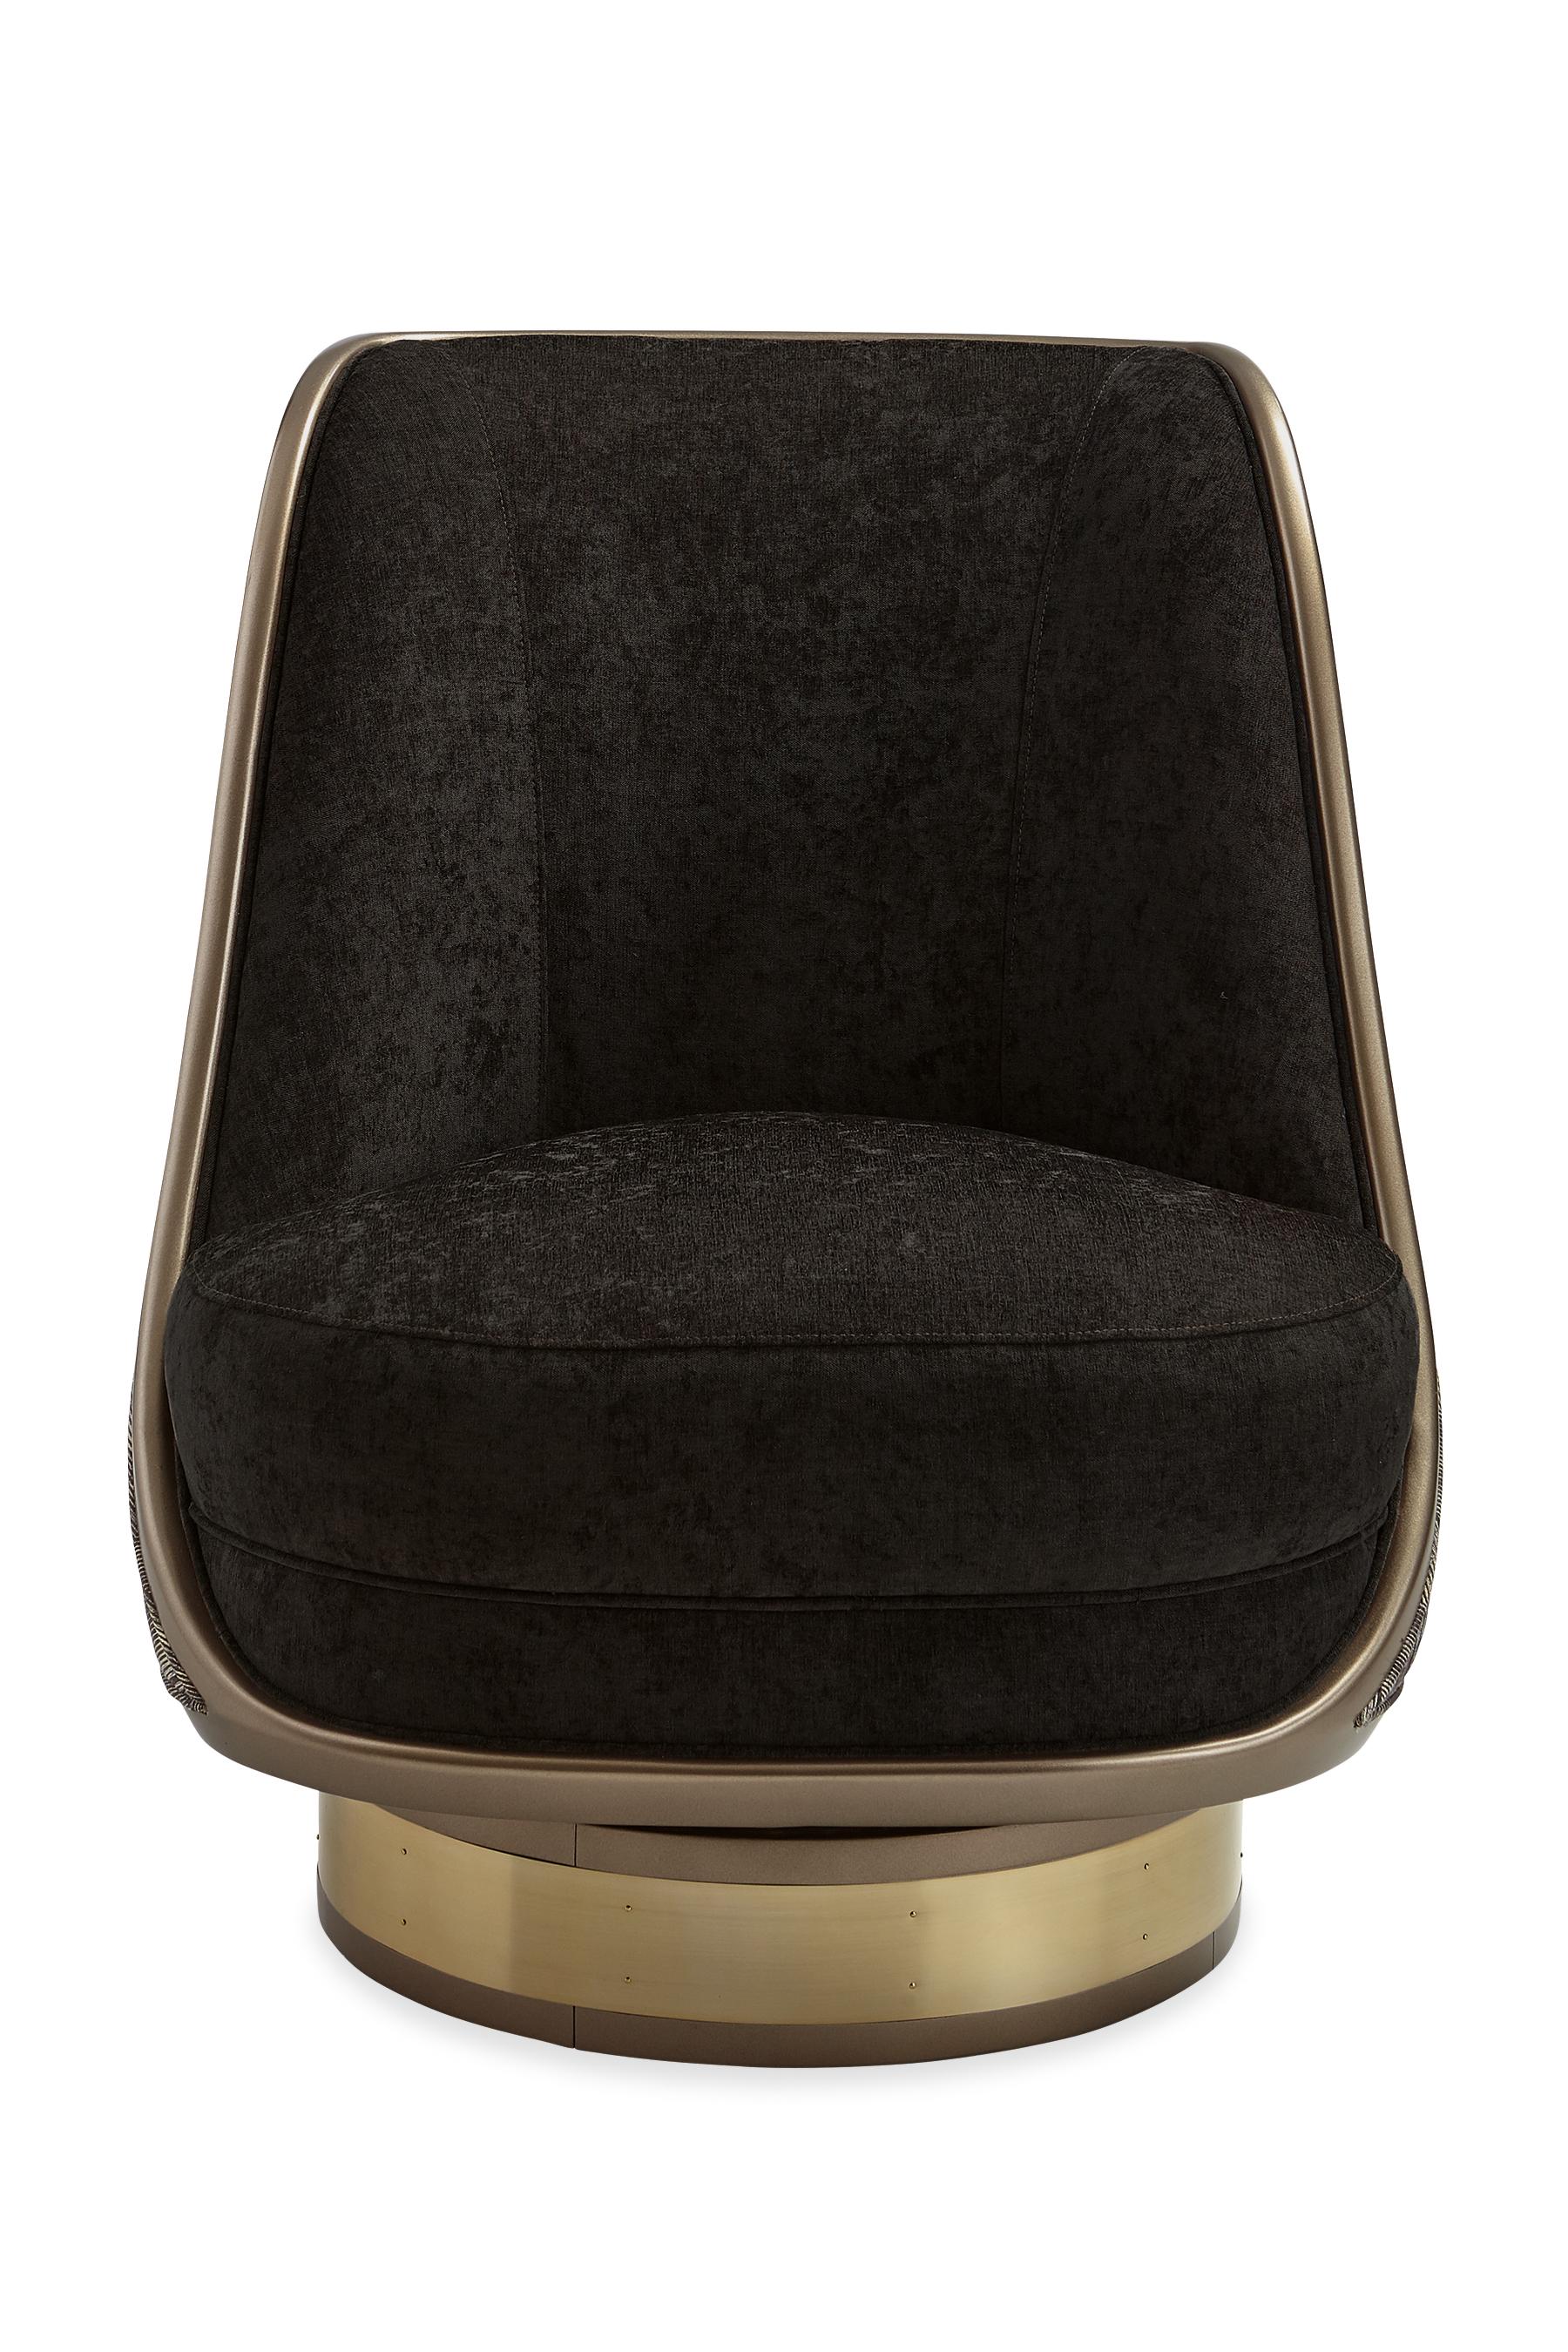 

    
Caracole GO FOR A SPIN Accent Chair Espresso/Gold UPH-018-035-A
